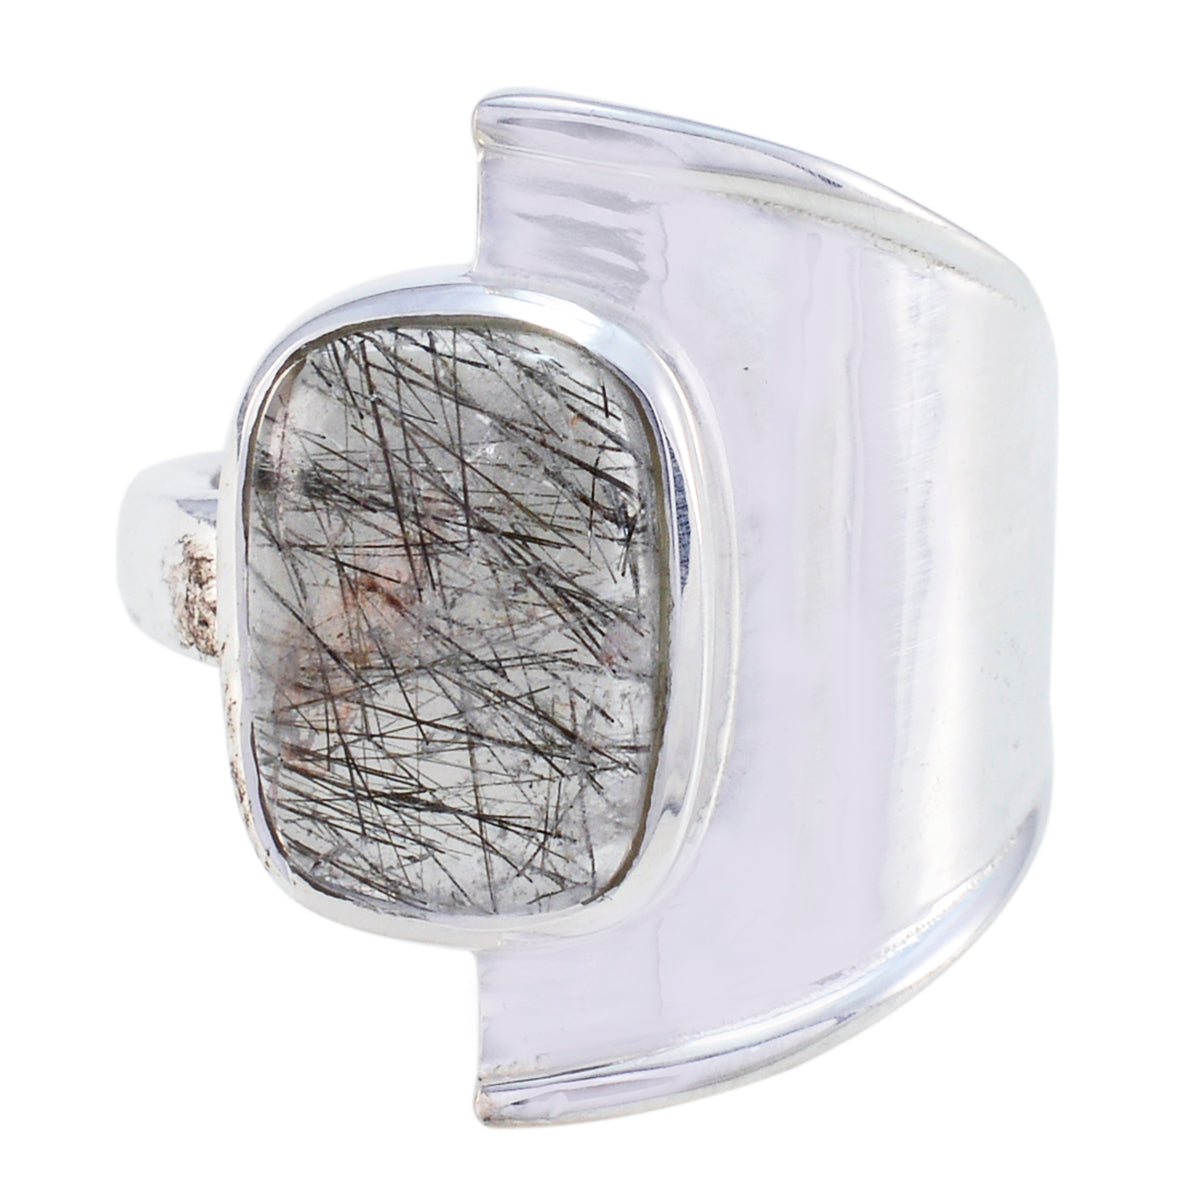 Flawless Gem Rutile Quartz Silver Ring Jewelry For Ashes Of Loved One